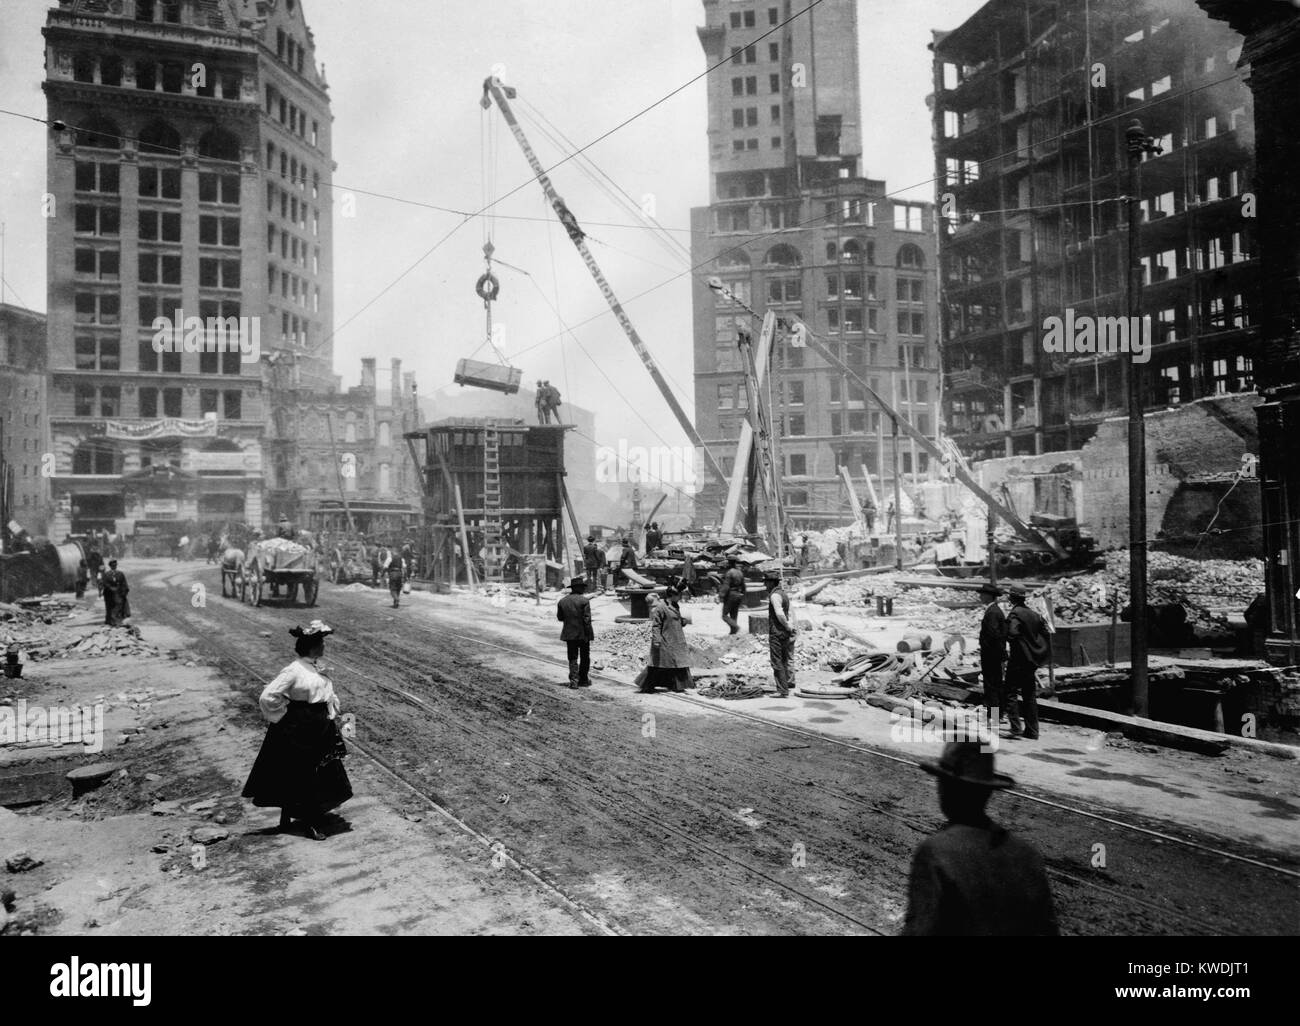 San Francisco rebuilding after the April 18, 1906 earthquake and fire. A crane is moving rubble, as several men and a woman walk by in 1906 (BSLOC 2017 17 52) Stock Photo